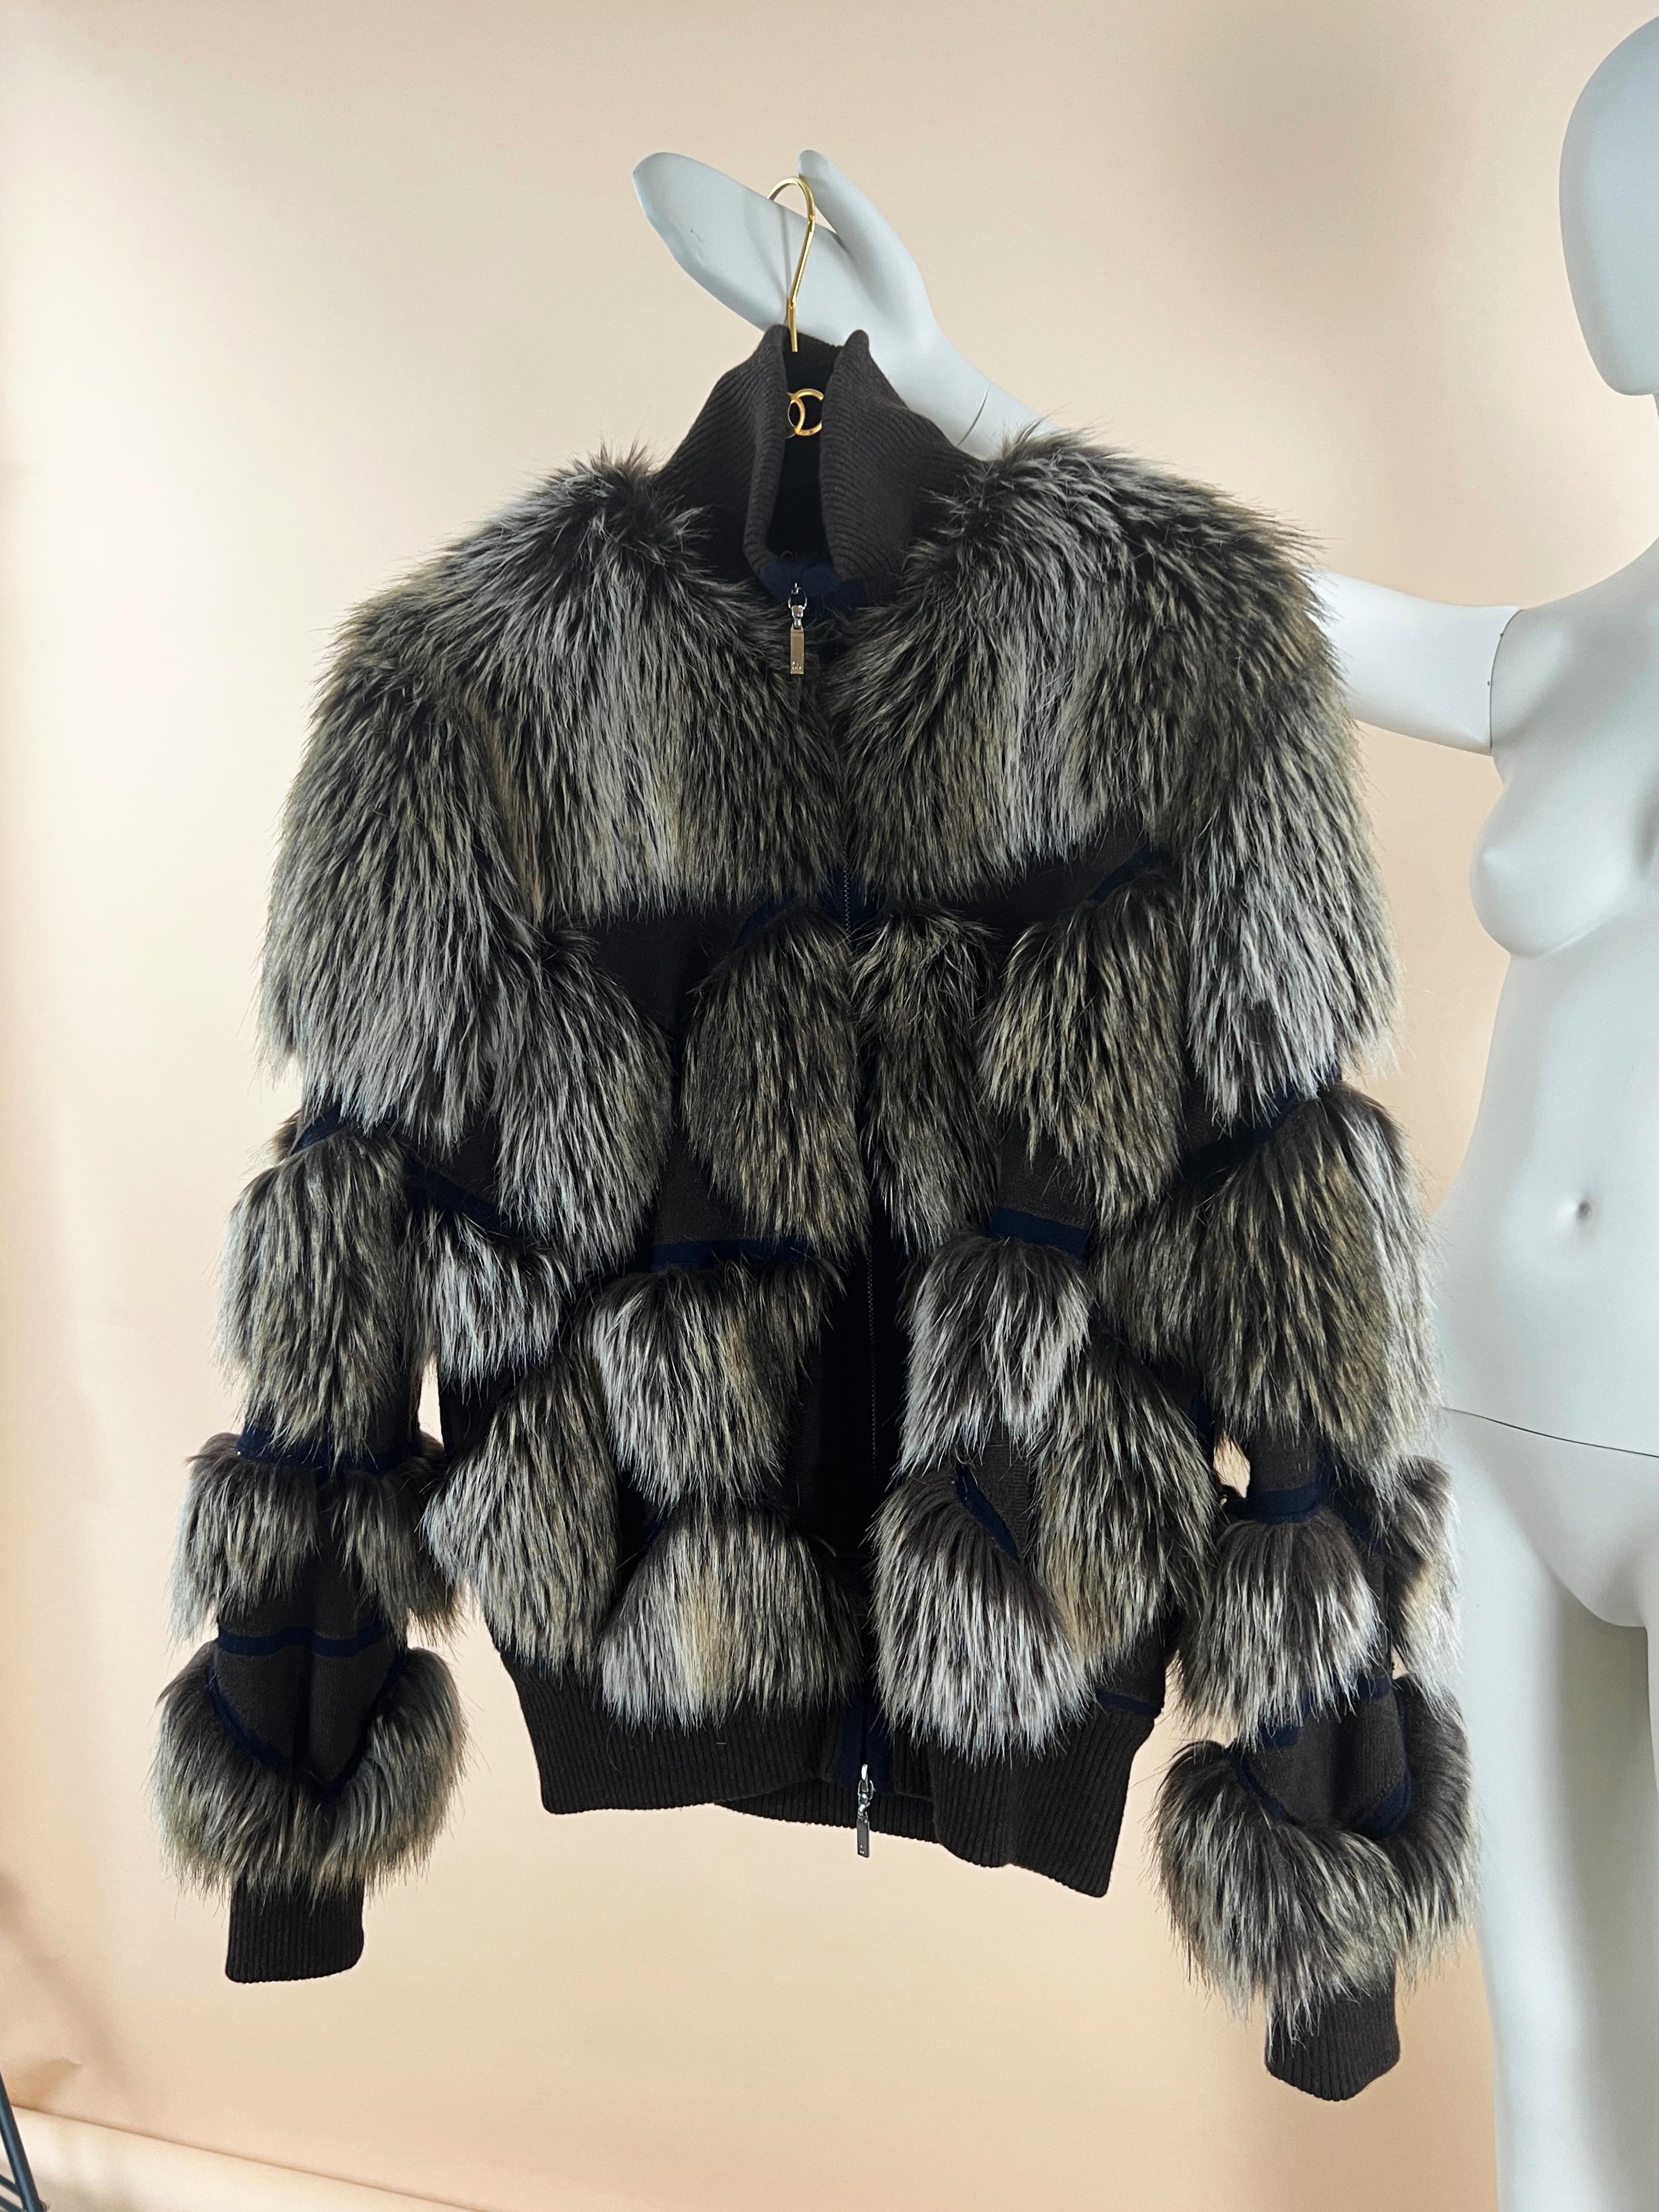 Gorgeous Chanel beige faux fantasy fur jacket with 100% cashmere thick lining. 
From ''Arctic Ice' 2010 Fall Collection. Something similar was also seen on Catwalk of 2018 Fall Collection.
CC two-way zippers at front. Very stylish oversized